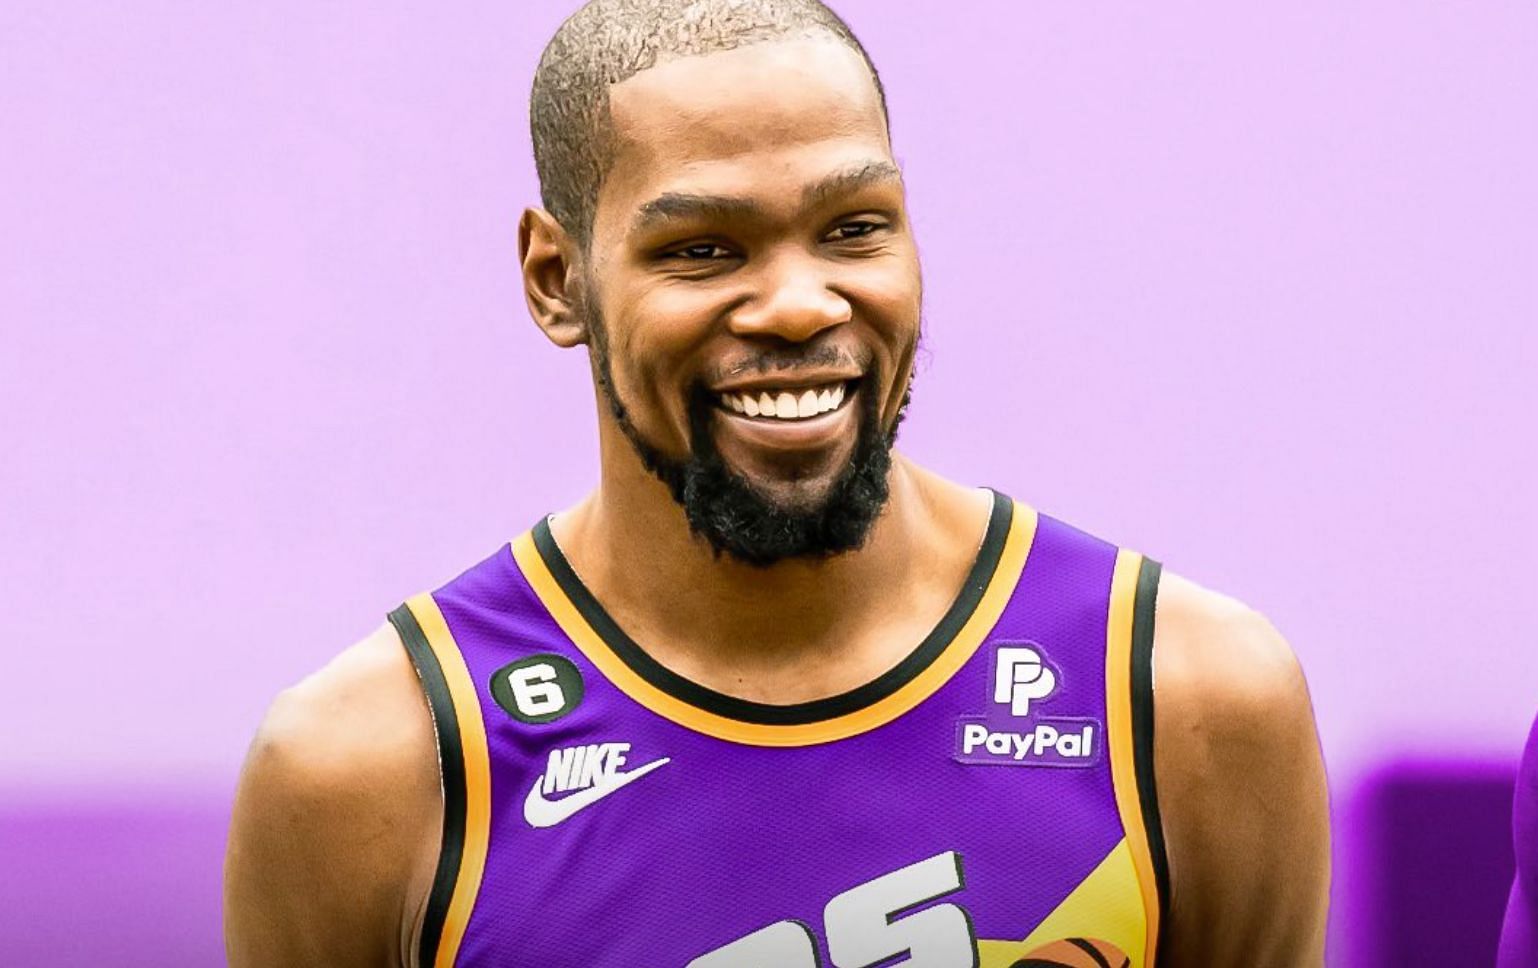 Fans hilariously react to photo of alleged Kevin Durant haircut